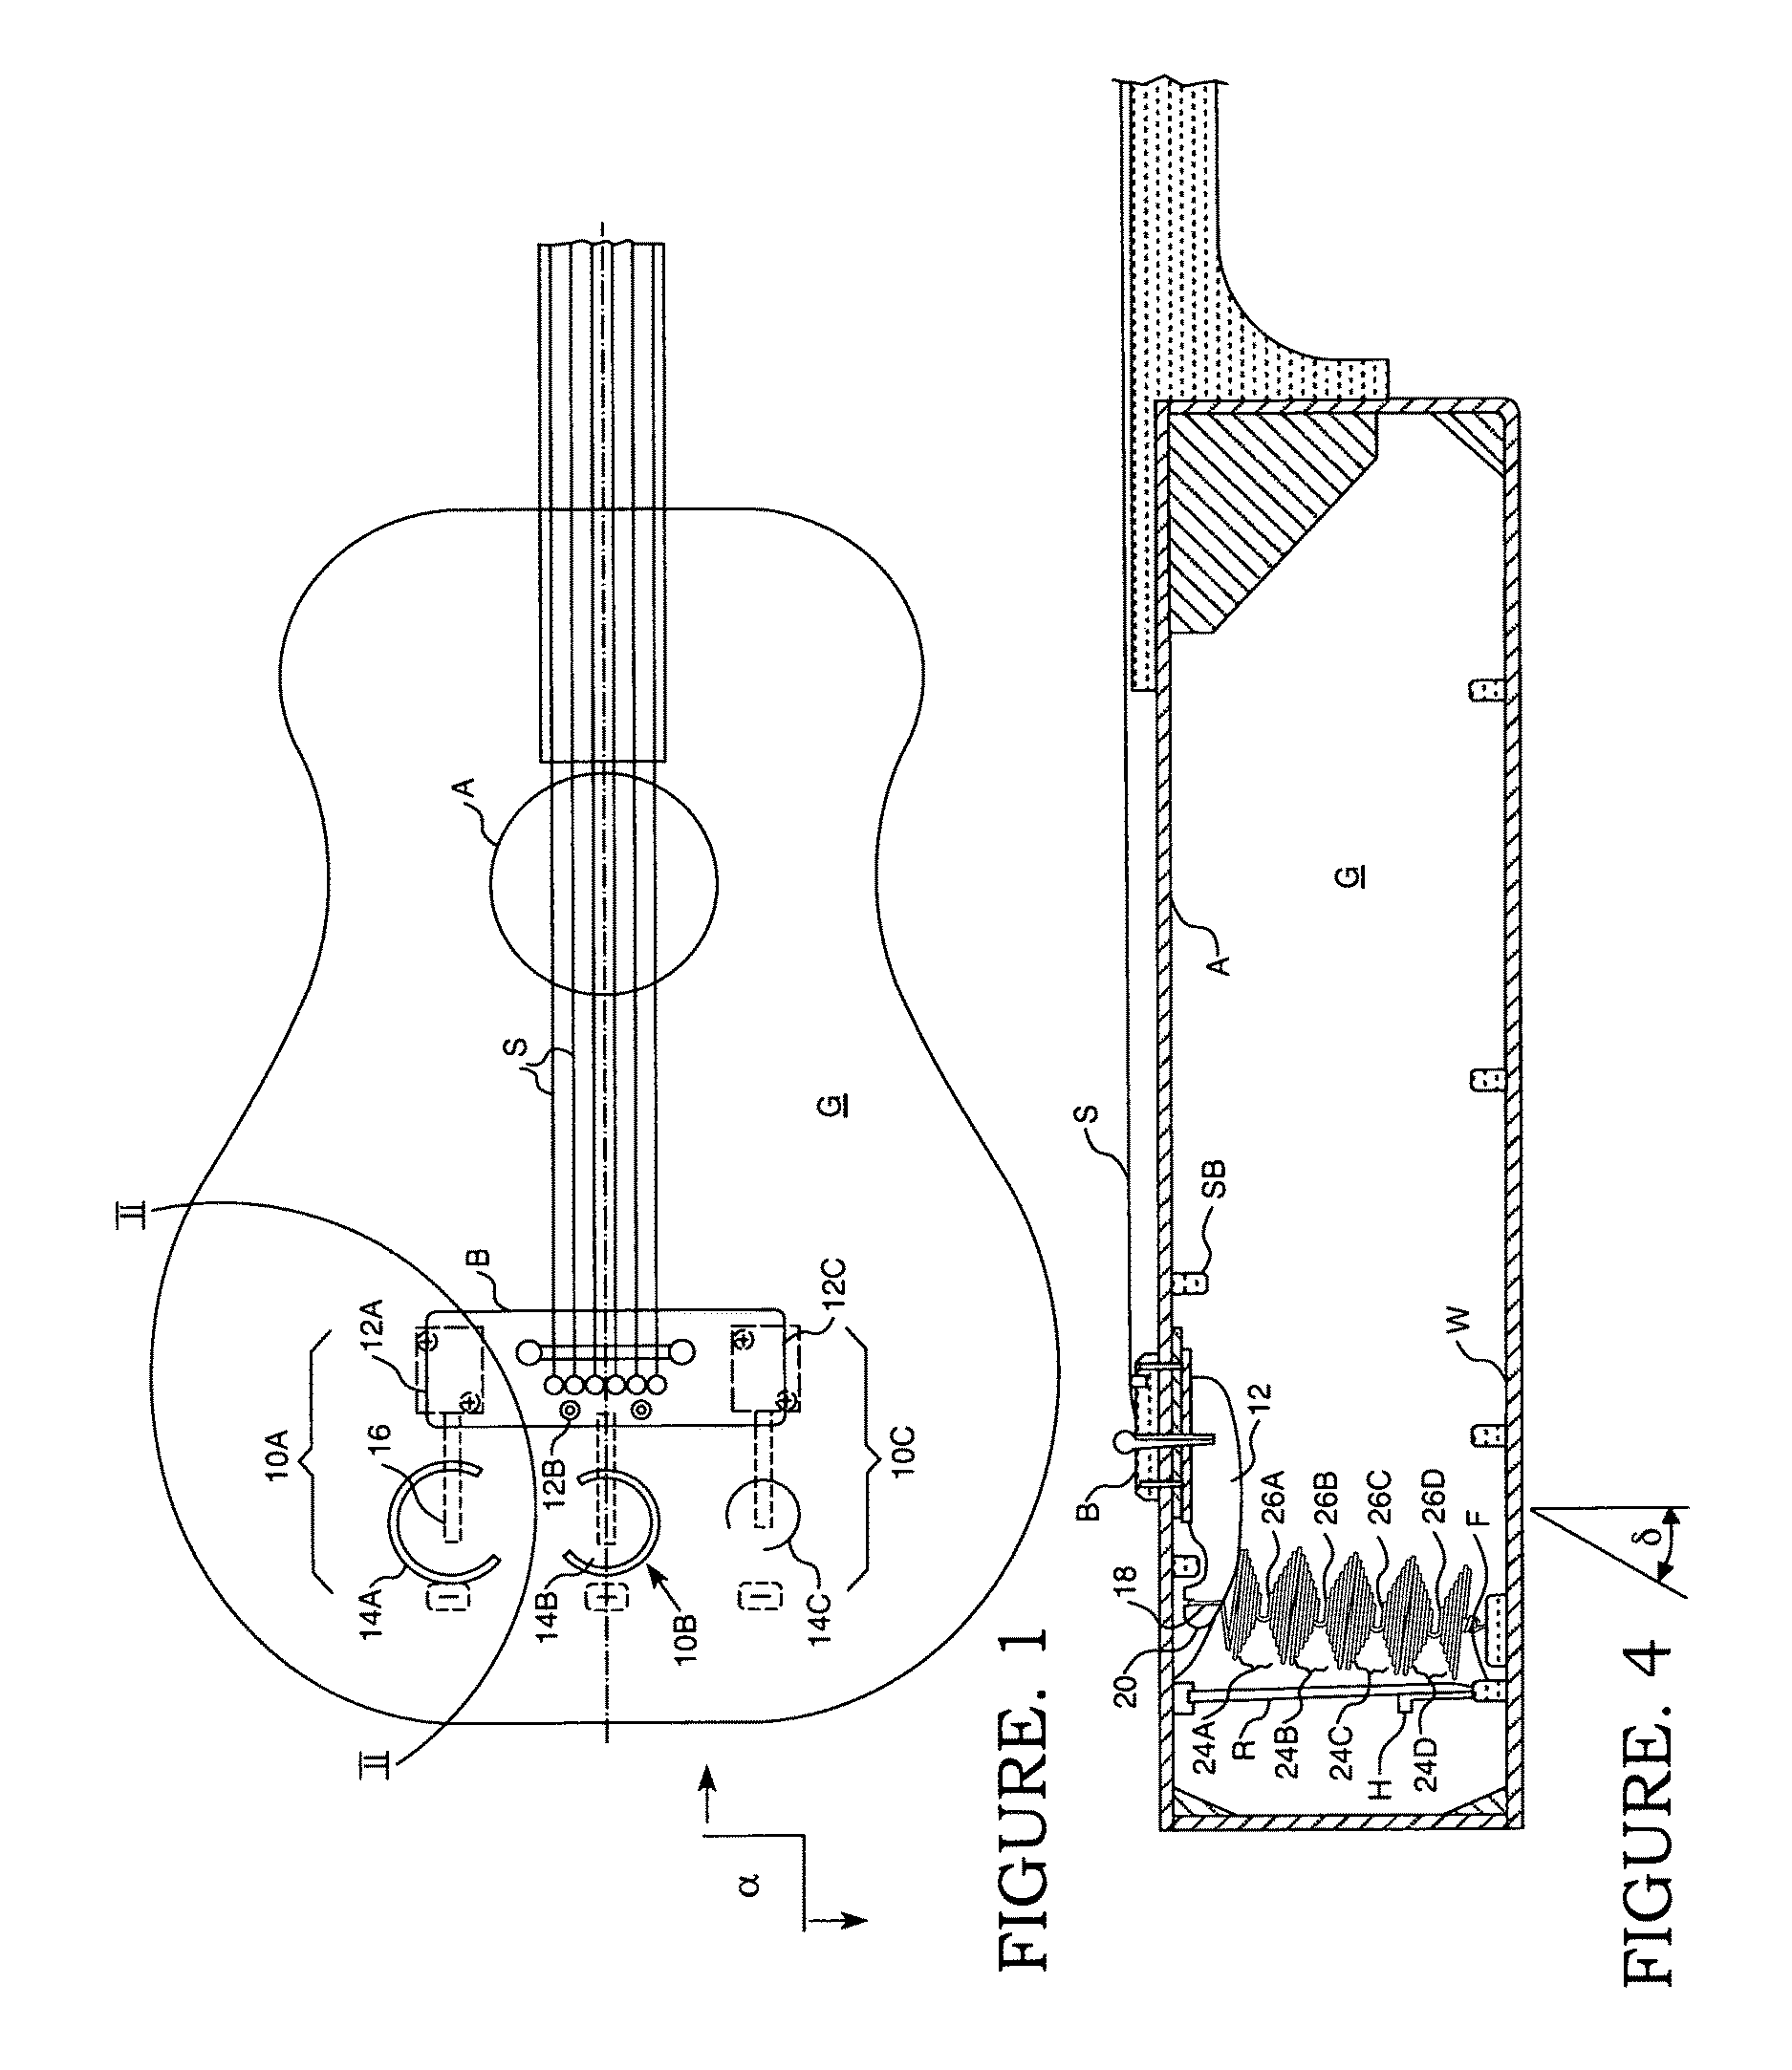 Organic sound texture enhancement and bridge strengthening system for acoustic guitars and other stringed instruments